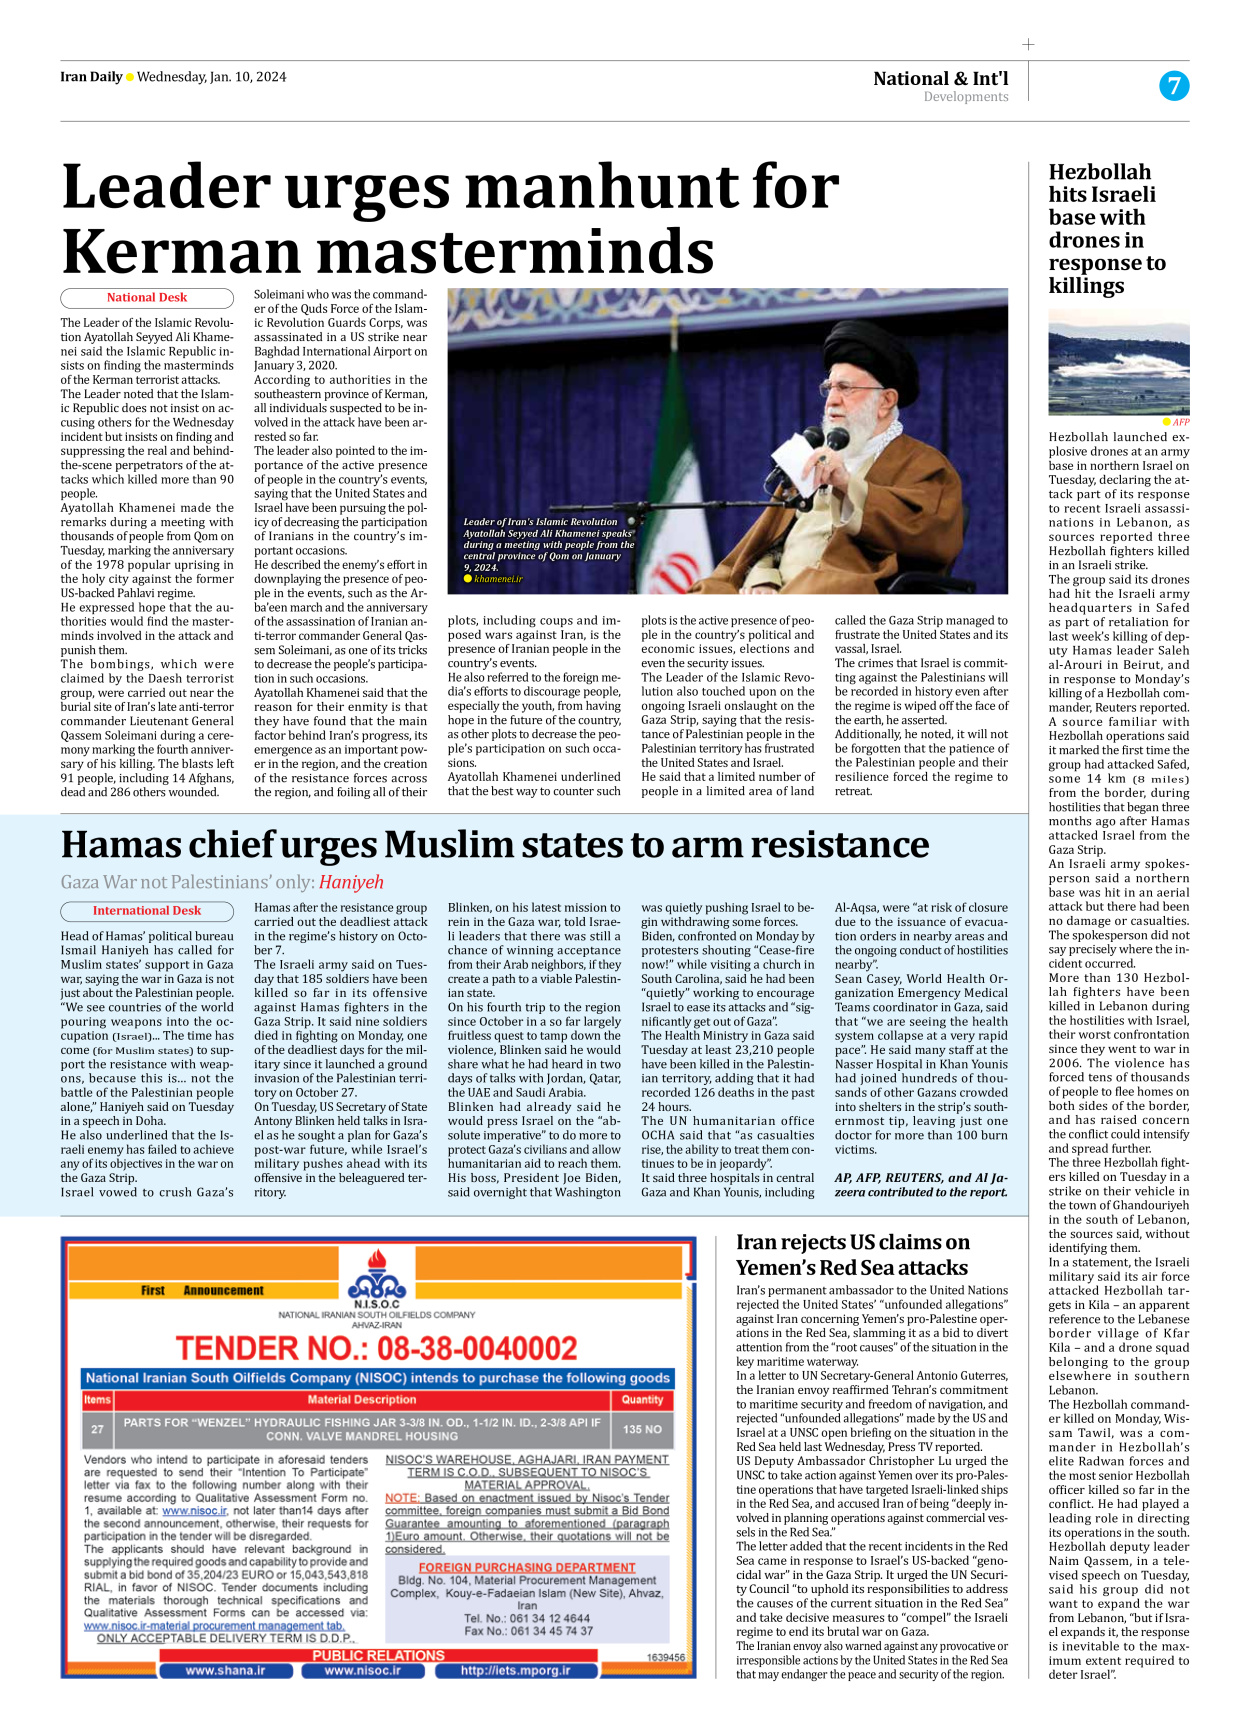 Iran Daily - Number Seven Thousand Four Hundred and Eighty One - 10 January 2024 - Page 7